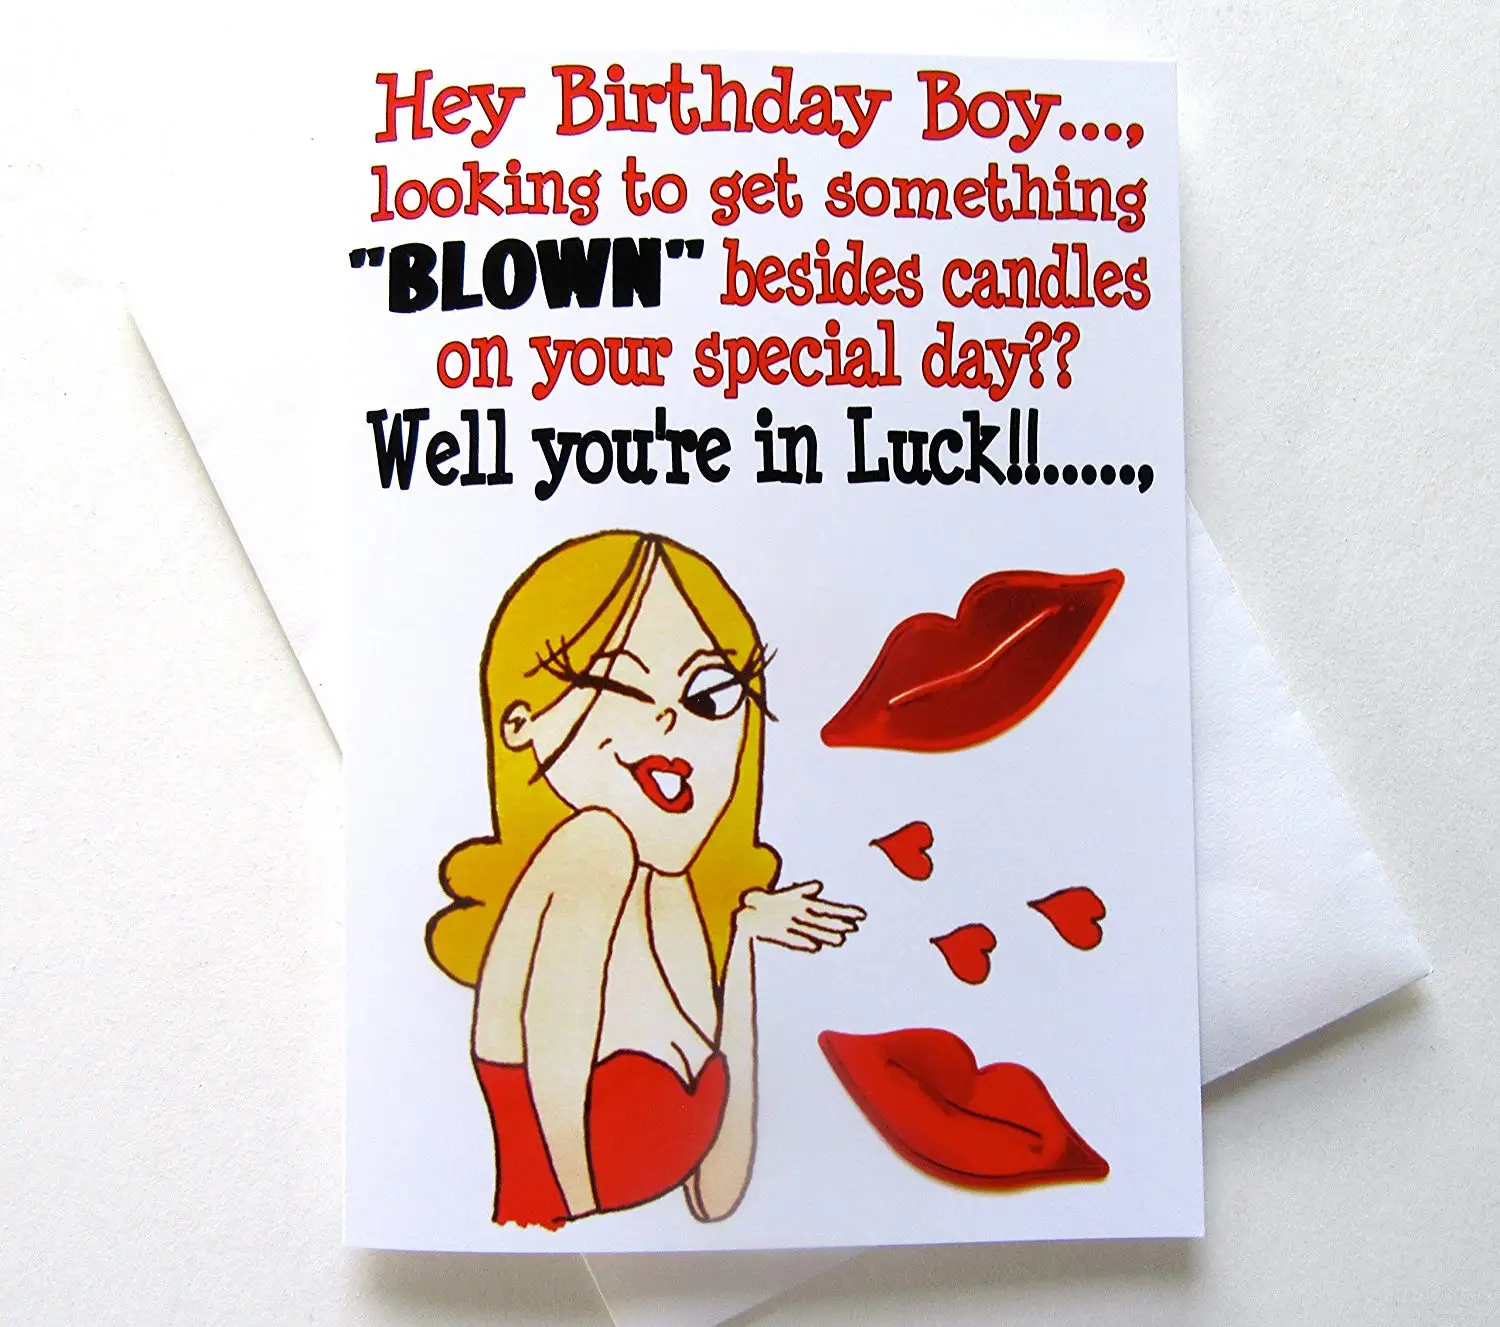 Cheap Sexy Man Birthday Card Find Sexy Man Birthday Card Deals On Line At